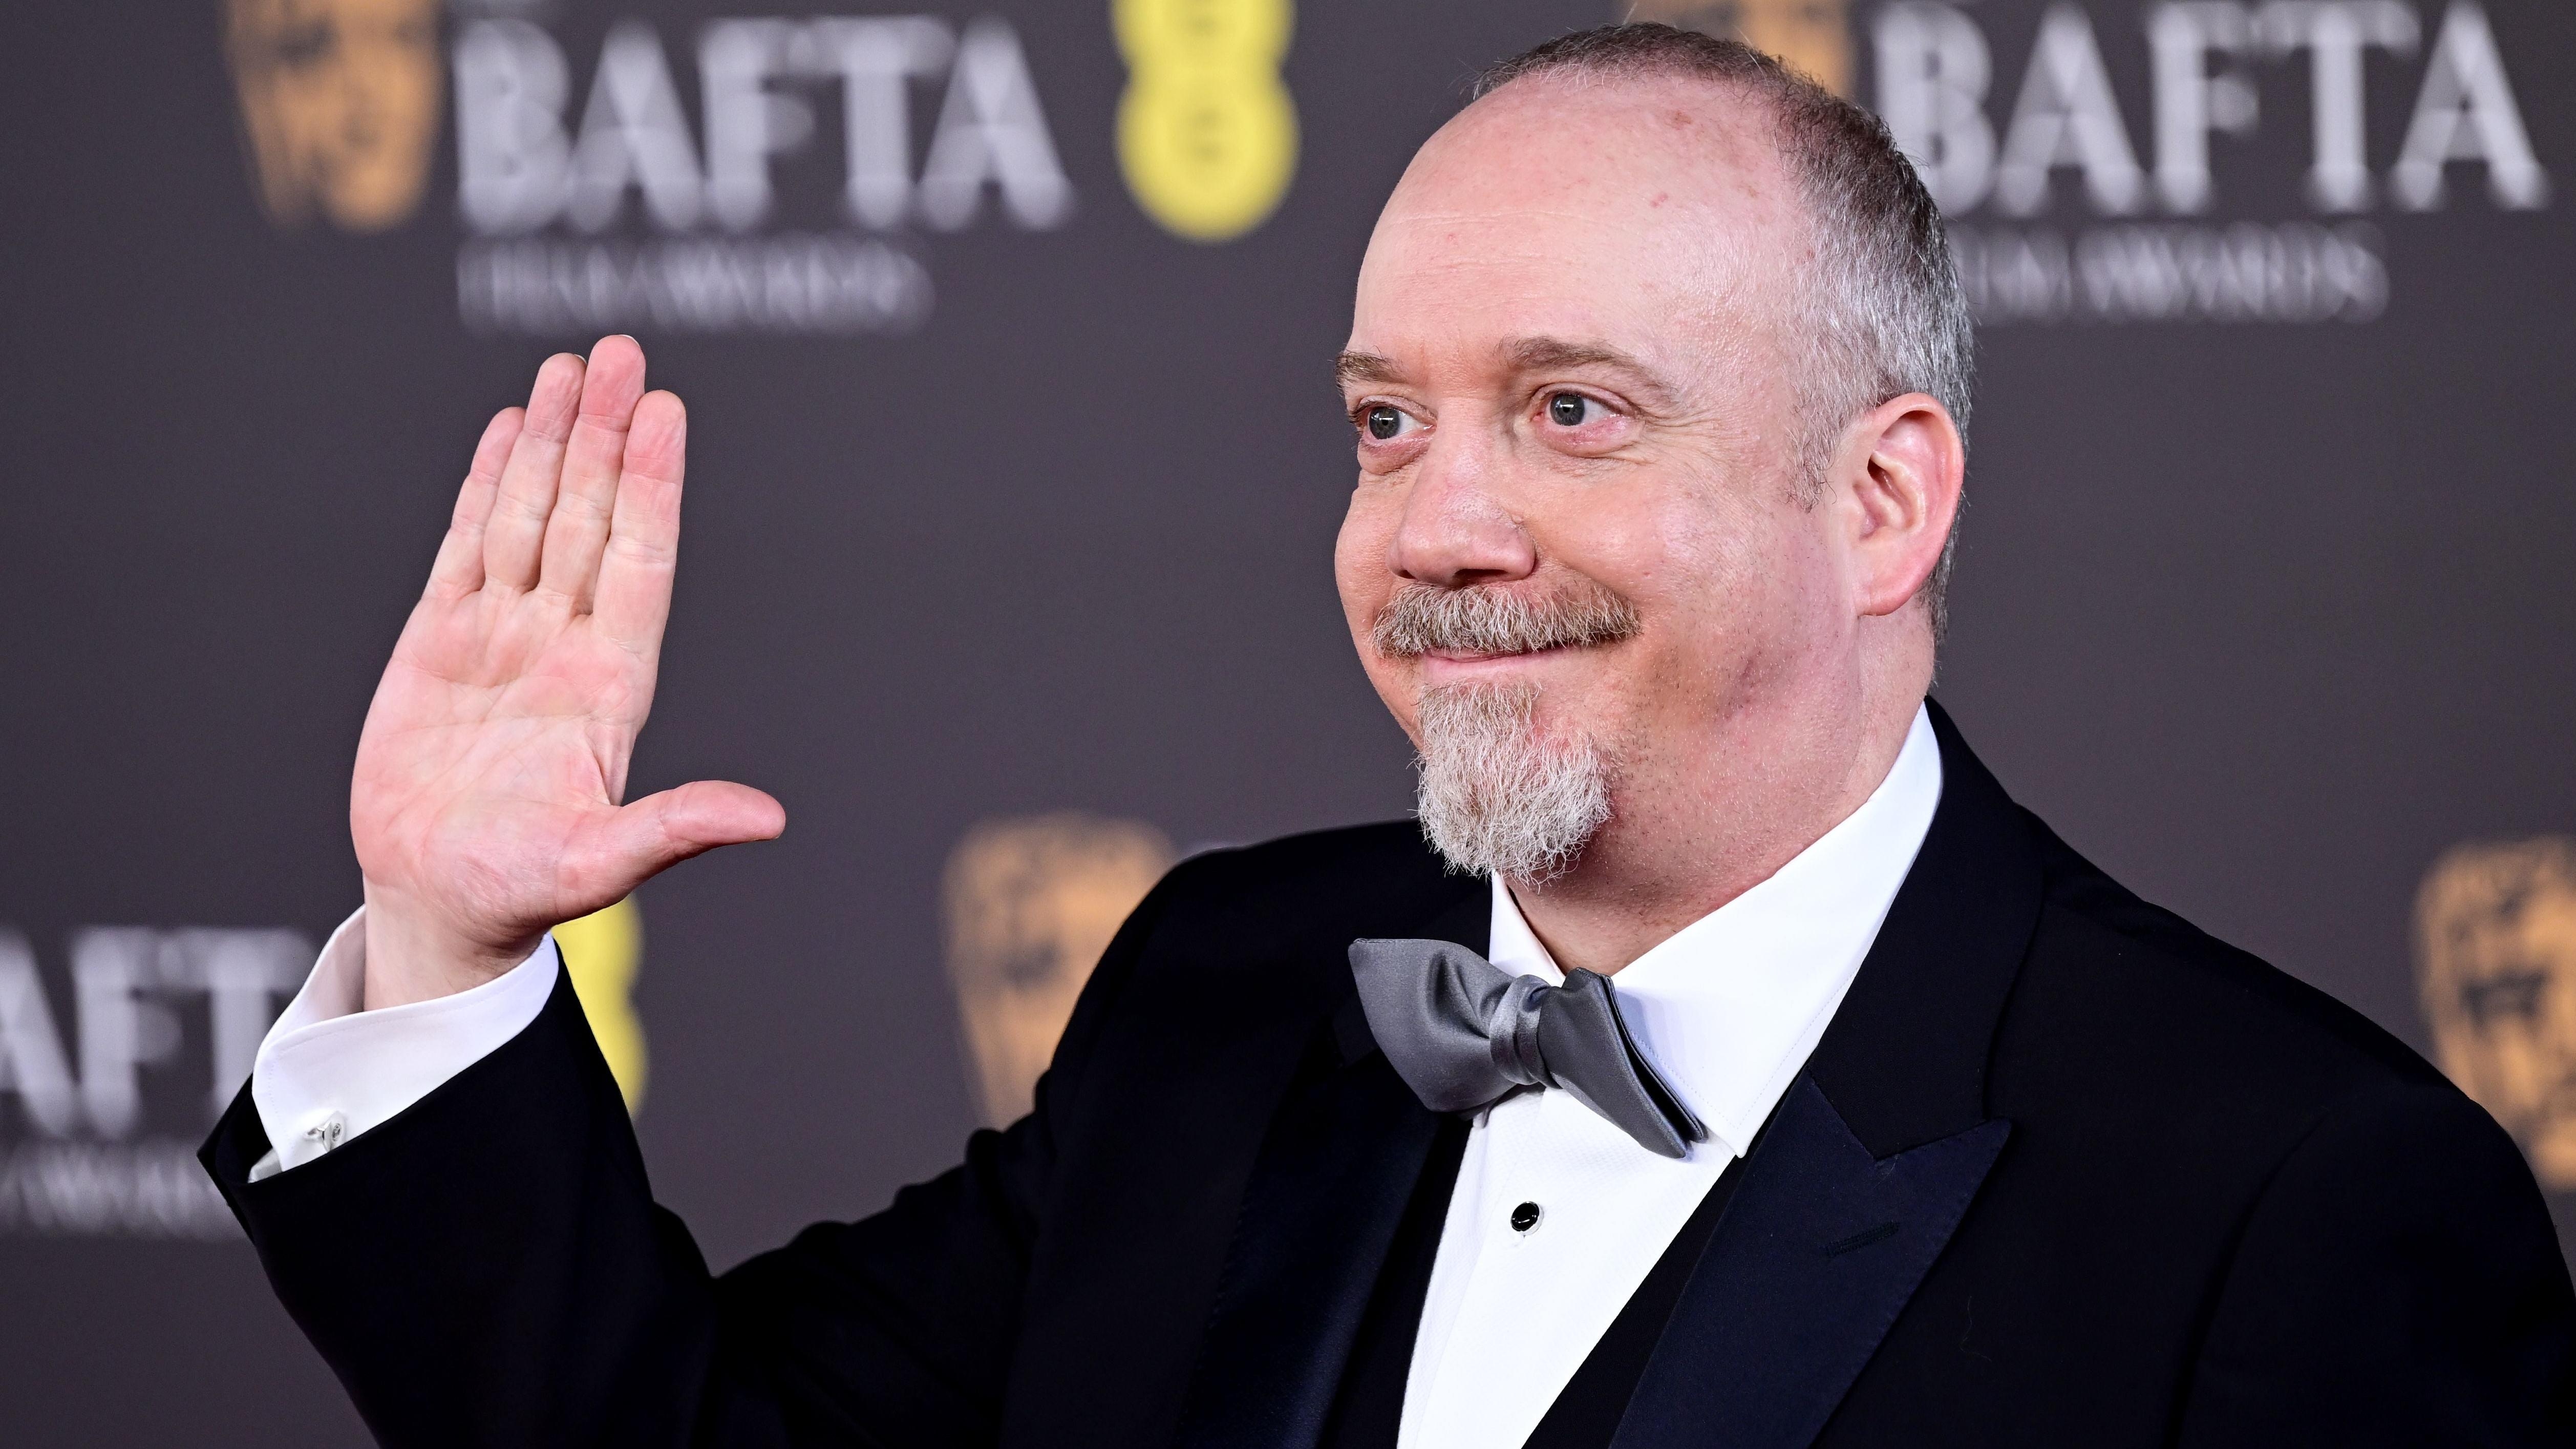 More disappointment for Big Fat Liar fans as Paul Giamatti signs on to Hostel TV show